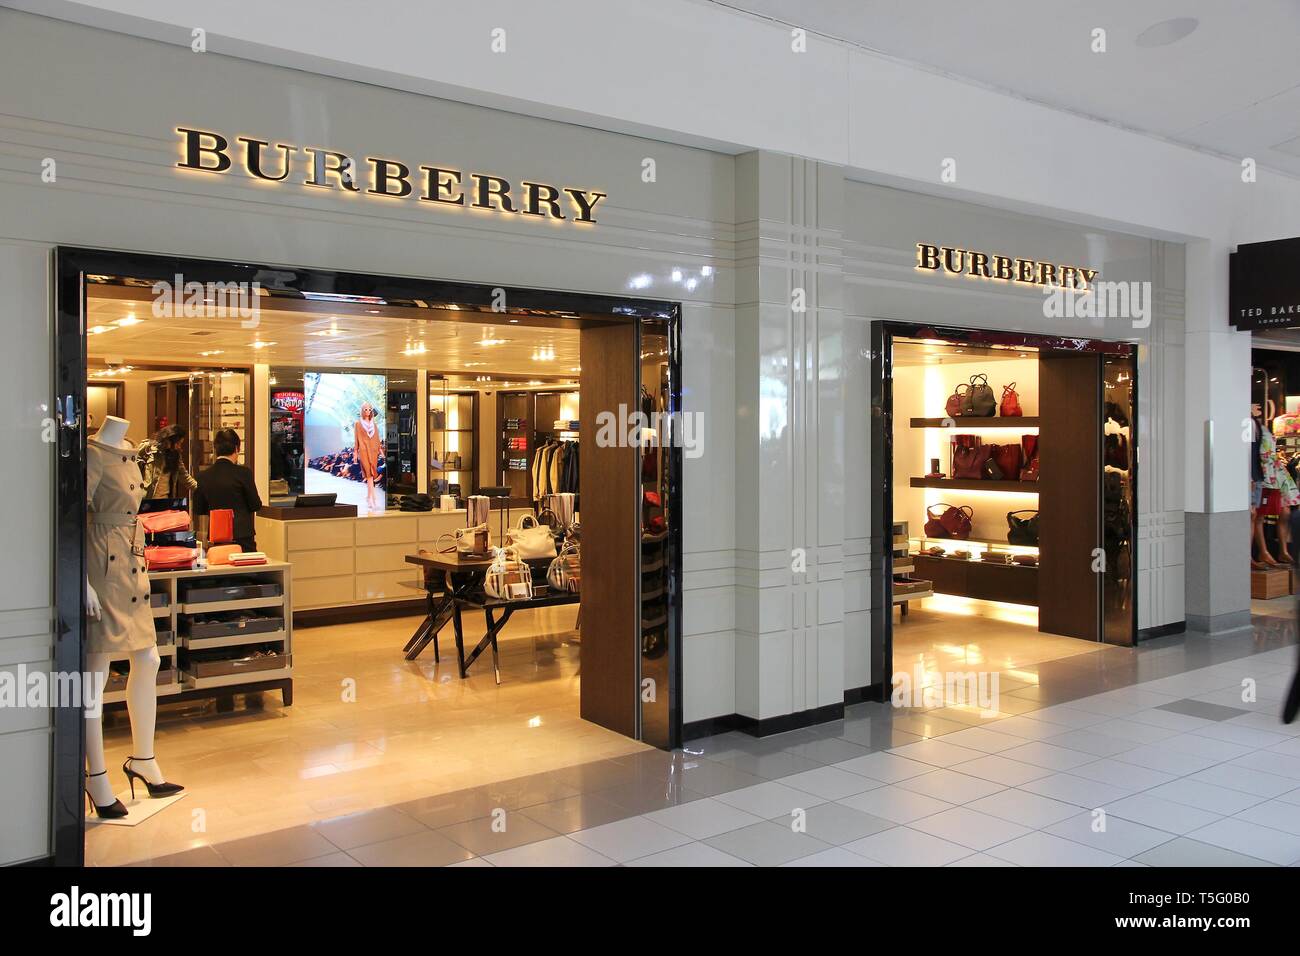 LONDON, UK - APRIL 16, 2014: Burberry fashion store at London Heathrow  Airport, UK. Burberry exists since 1856 and has 473 stores Stock Photo -  Alamy